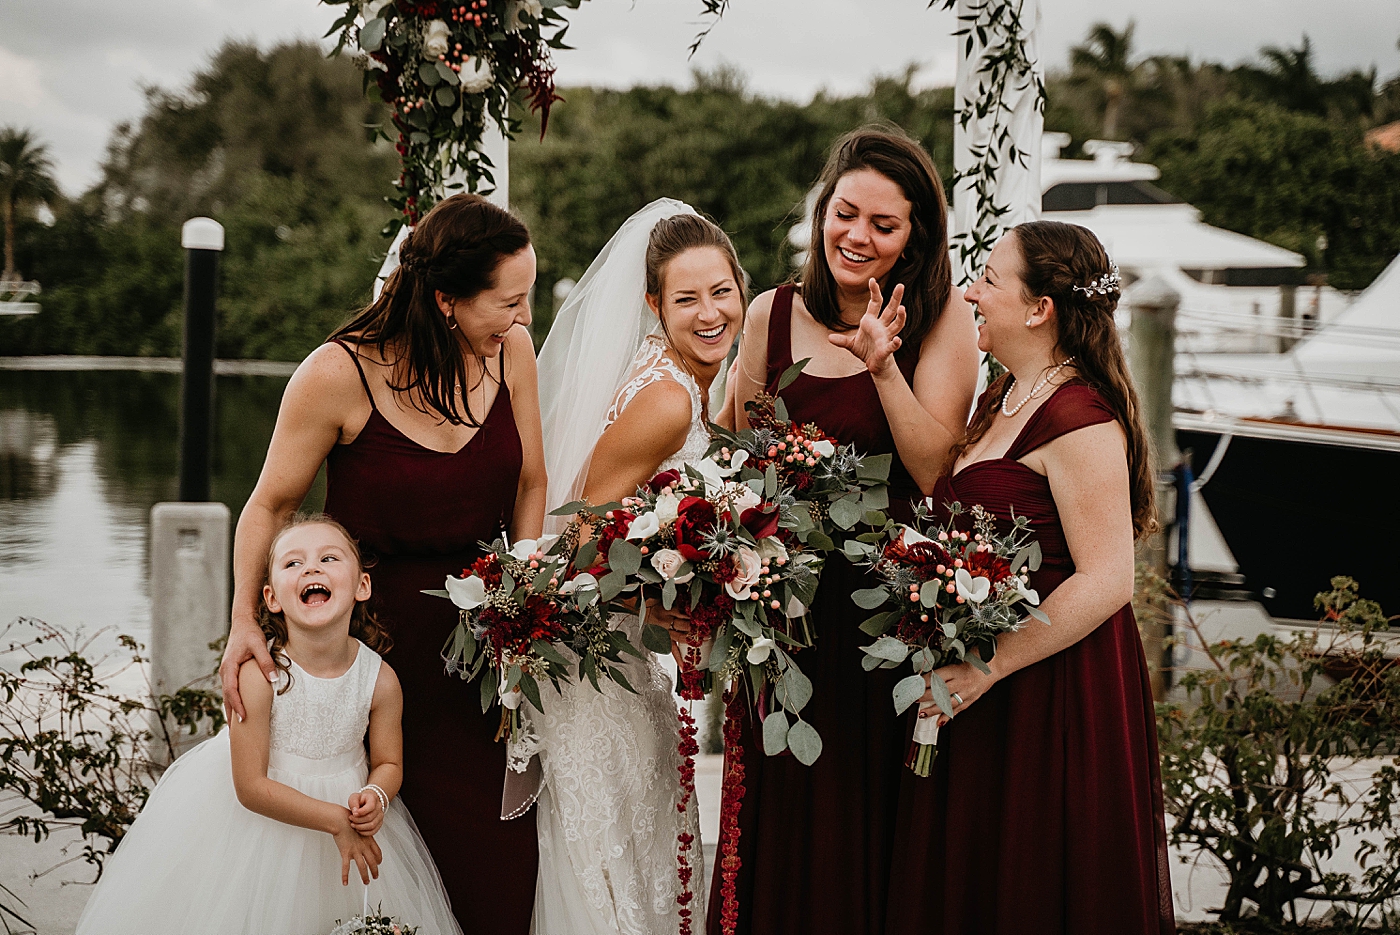 Bride with Bridesmaids and flower girl fun portrait by the water Out of the Blue Celebrations Wedding Photography captured by South Florida Wedding Photographer Krystal Capone Photography 